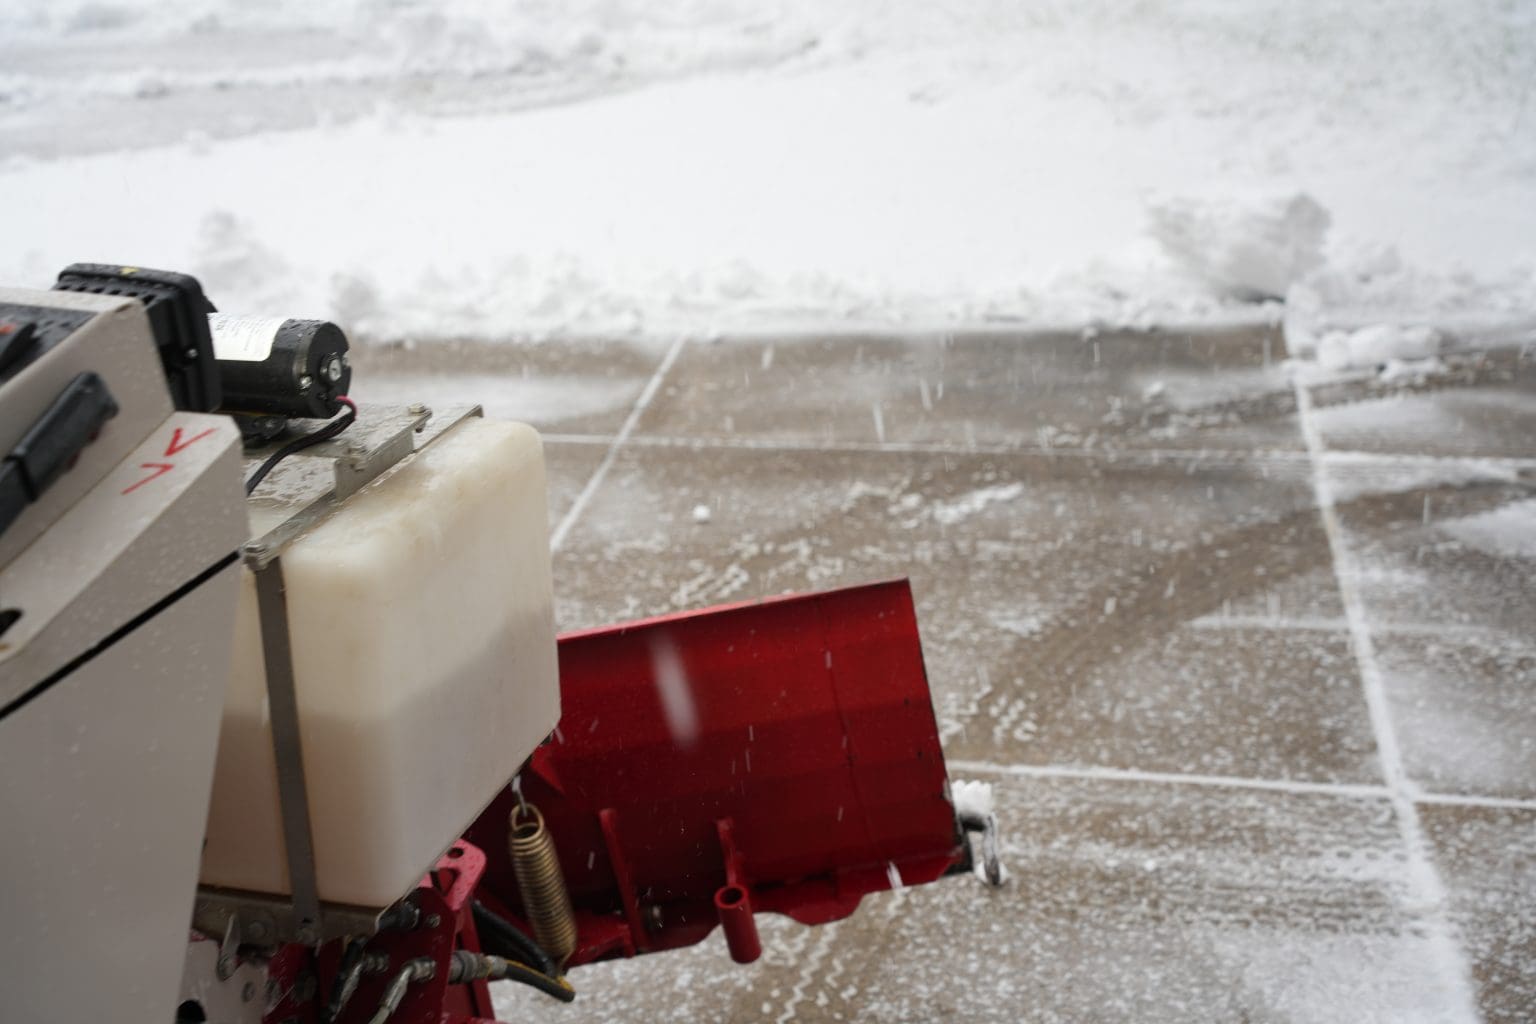 A commercial snow blower is being used for efficient snow and ice management on a sidewalk.